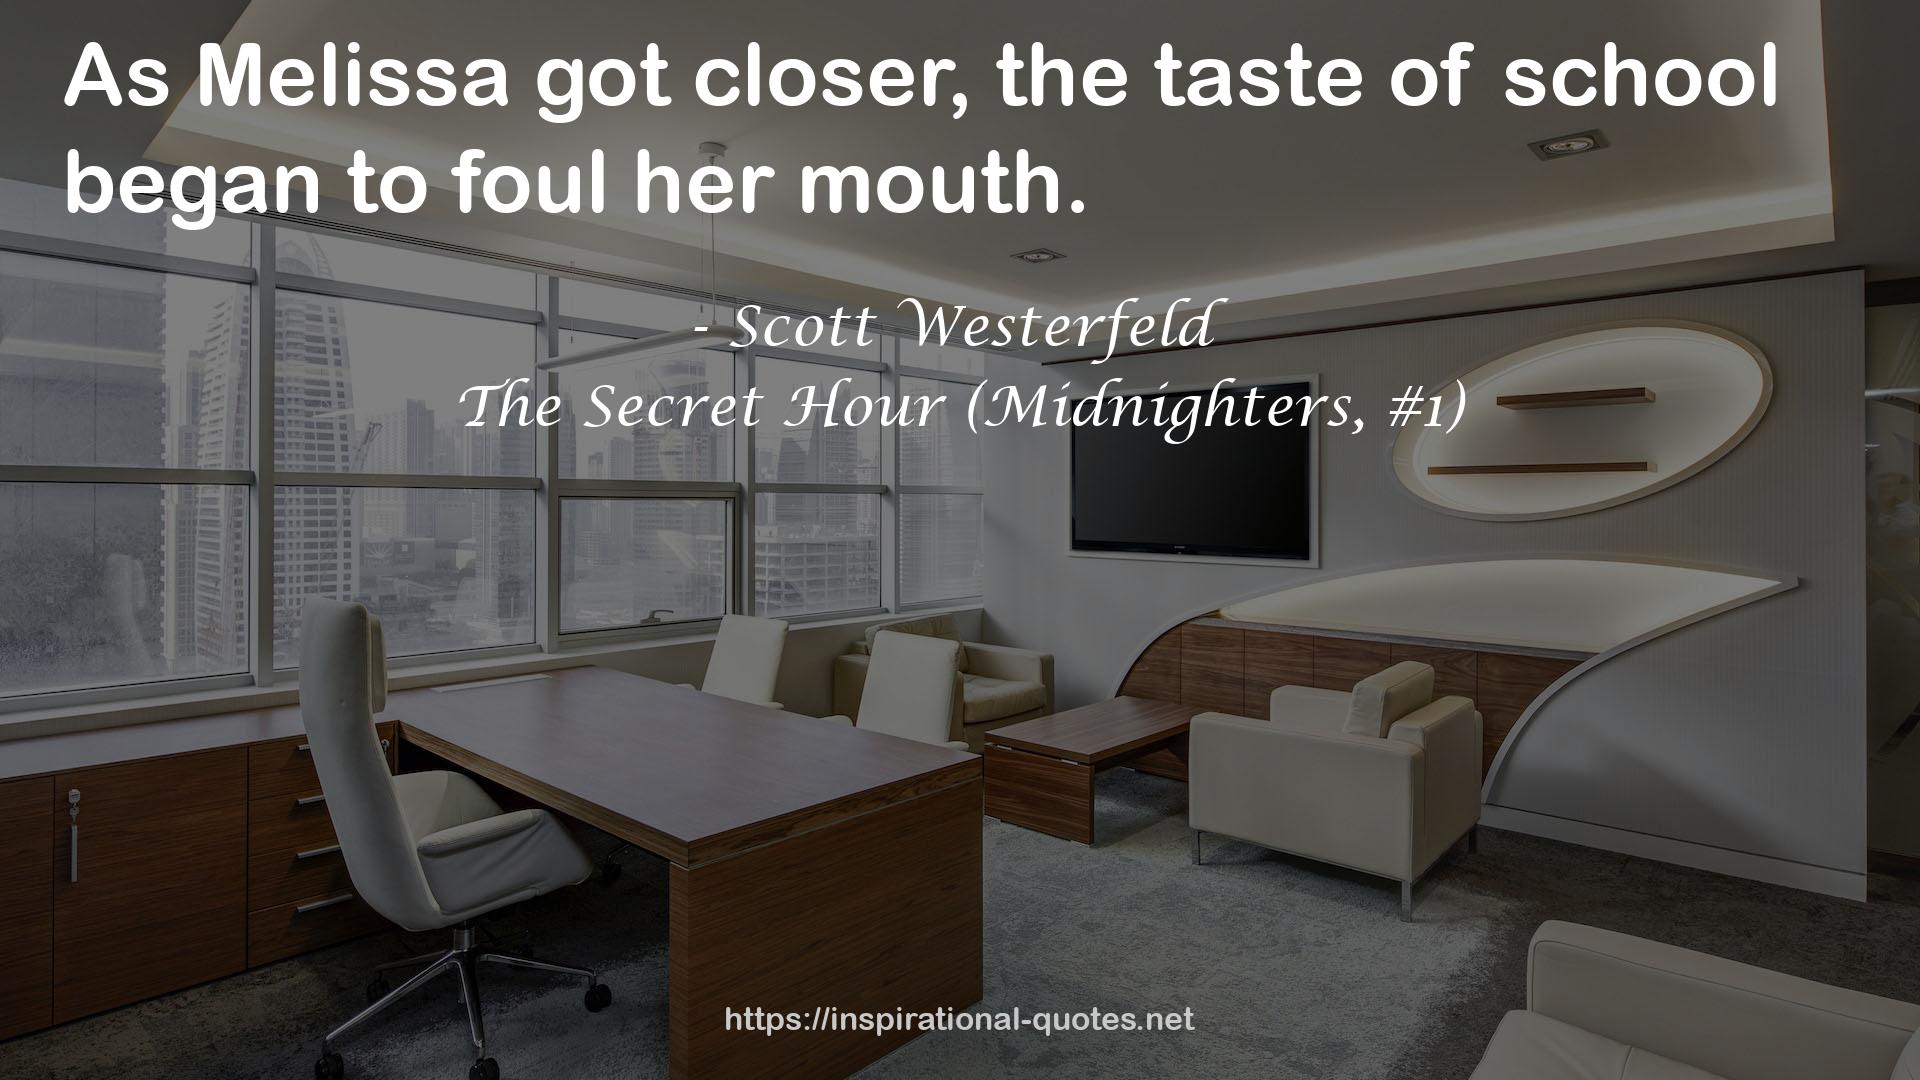 The Secret Hour (Midnighters, #1) QUOTES